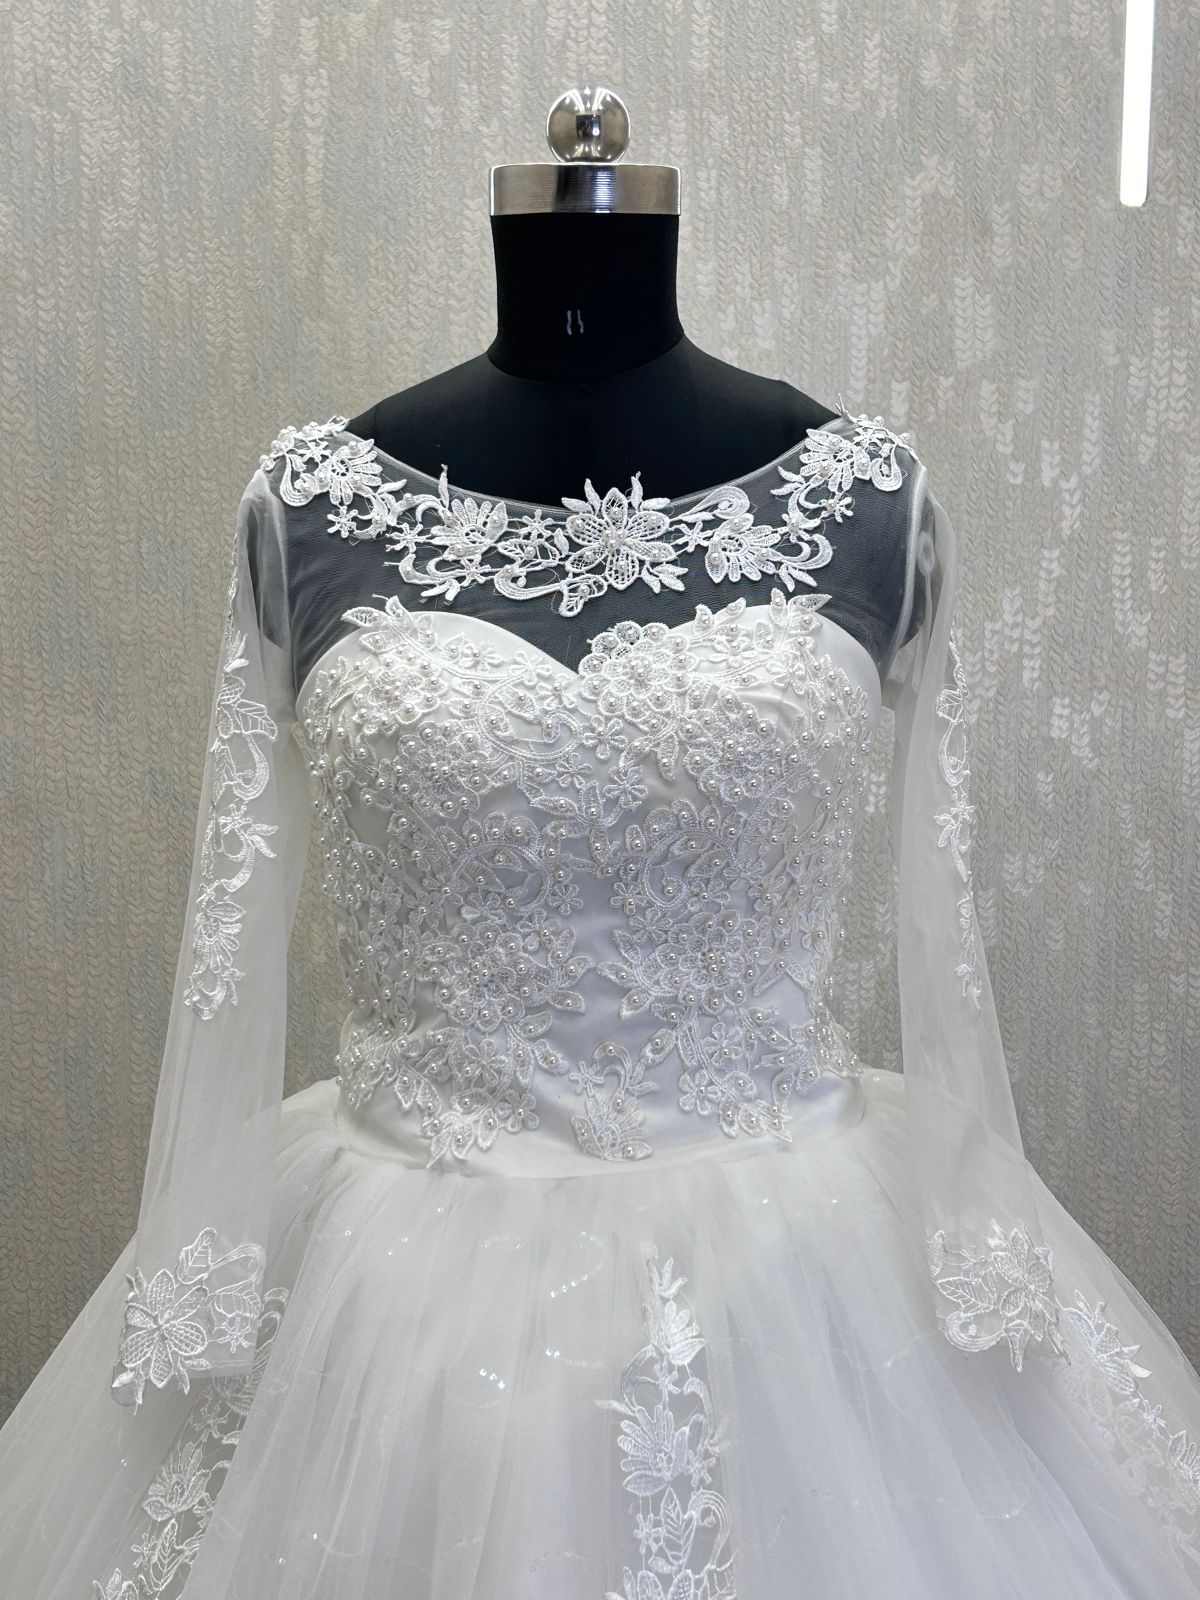 GownLink Radiant White Wedding Ball Gown with Pearl Beading GLGF042B